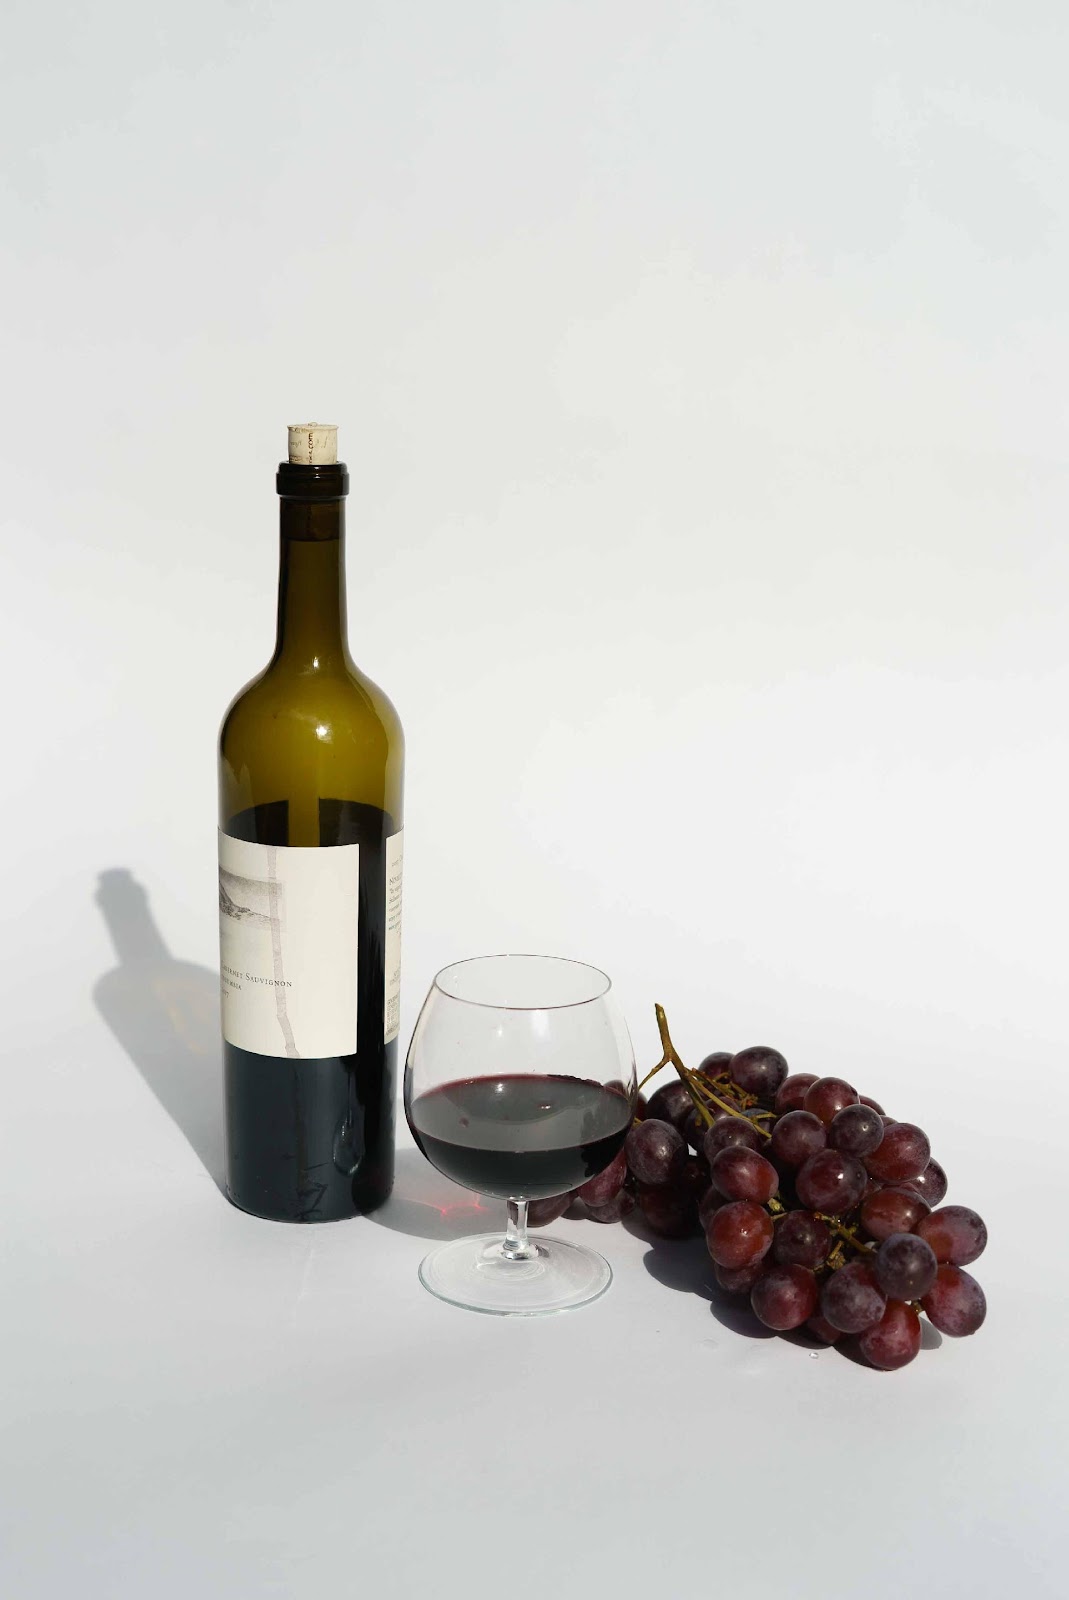 A bottle of wine, a glass with half-filled wine and a bunch of grape.